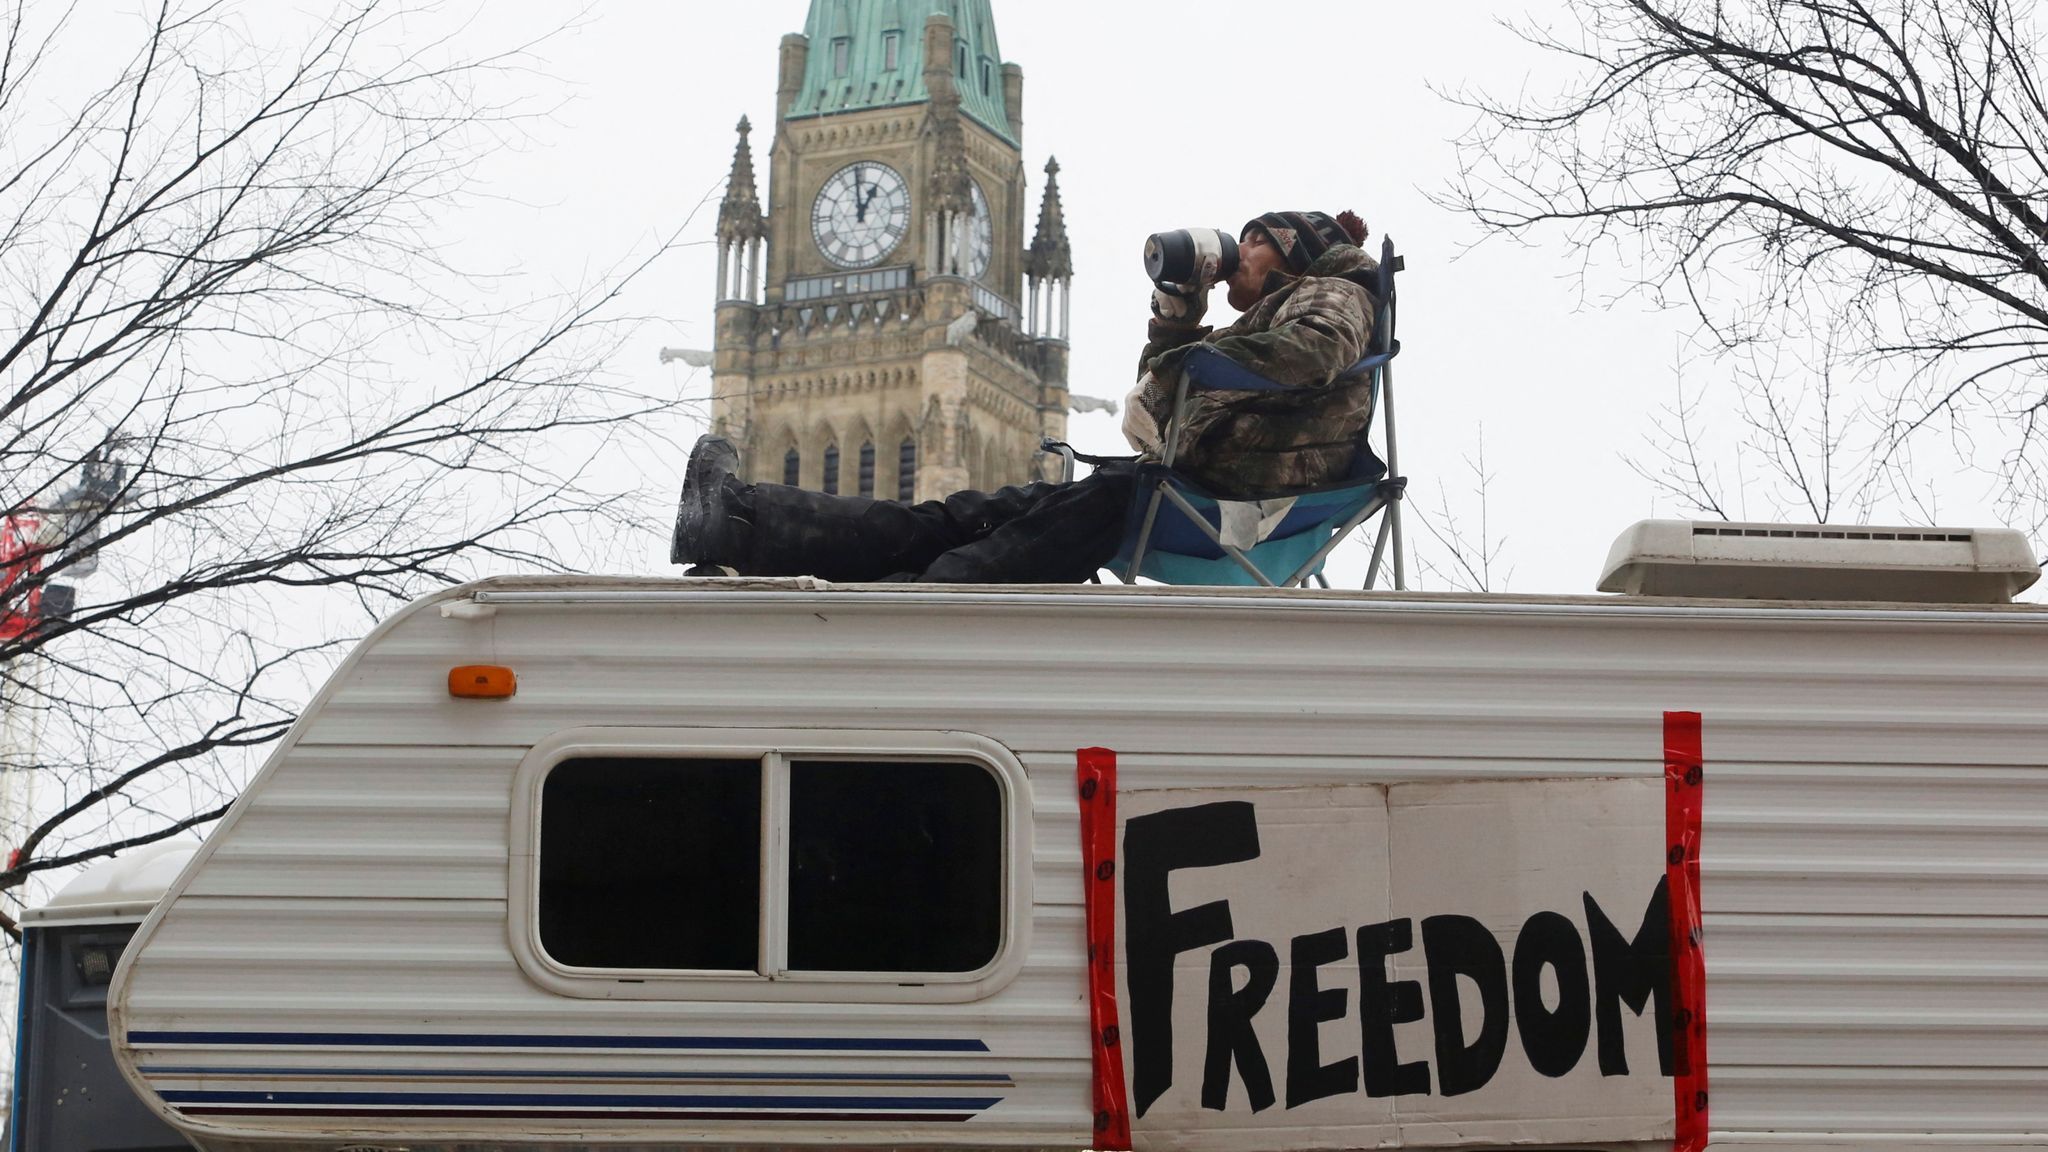 Ottawa declares state of emergency over 'out of control' Truckers' protest